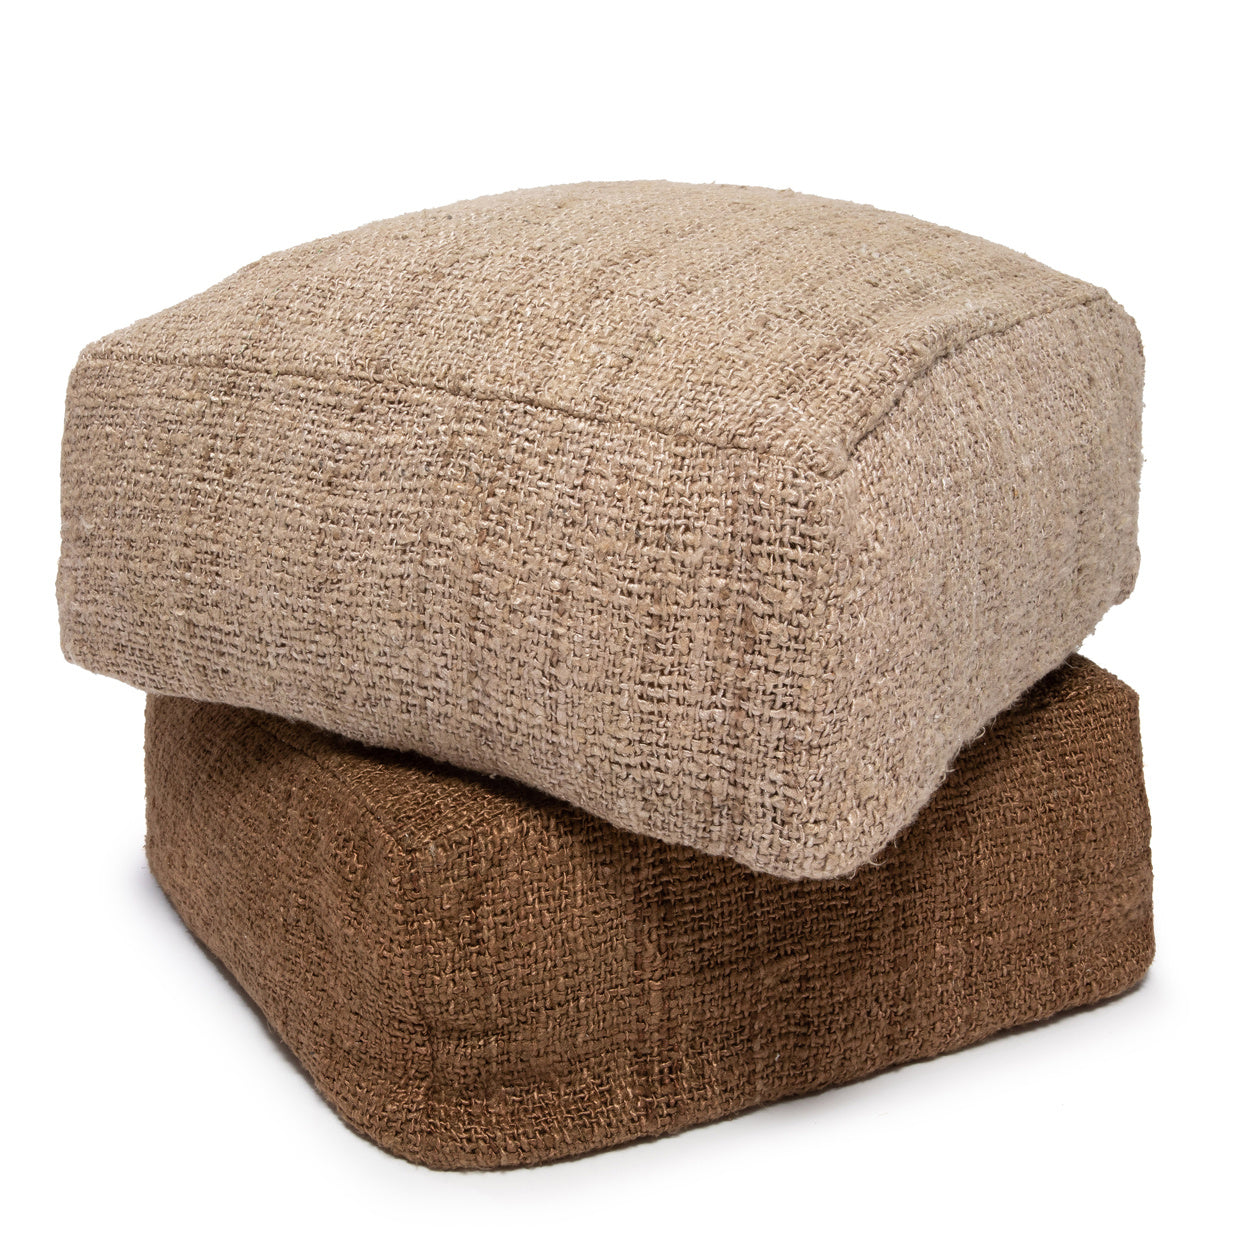 THE OH MY GEE Pouffe beige and brown front view